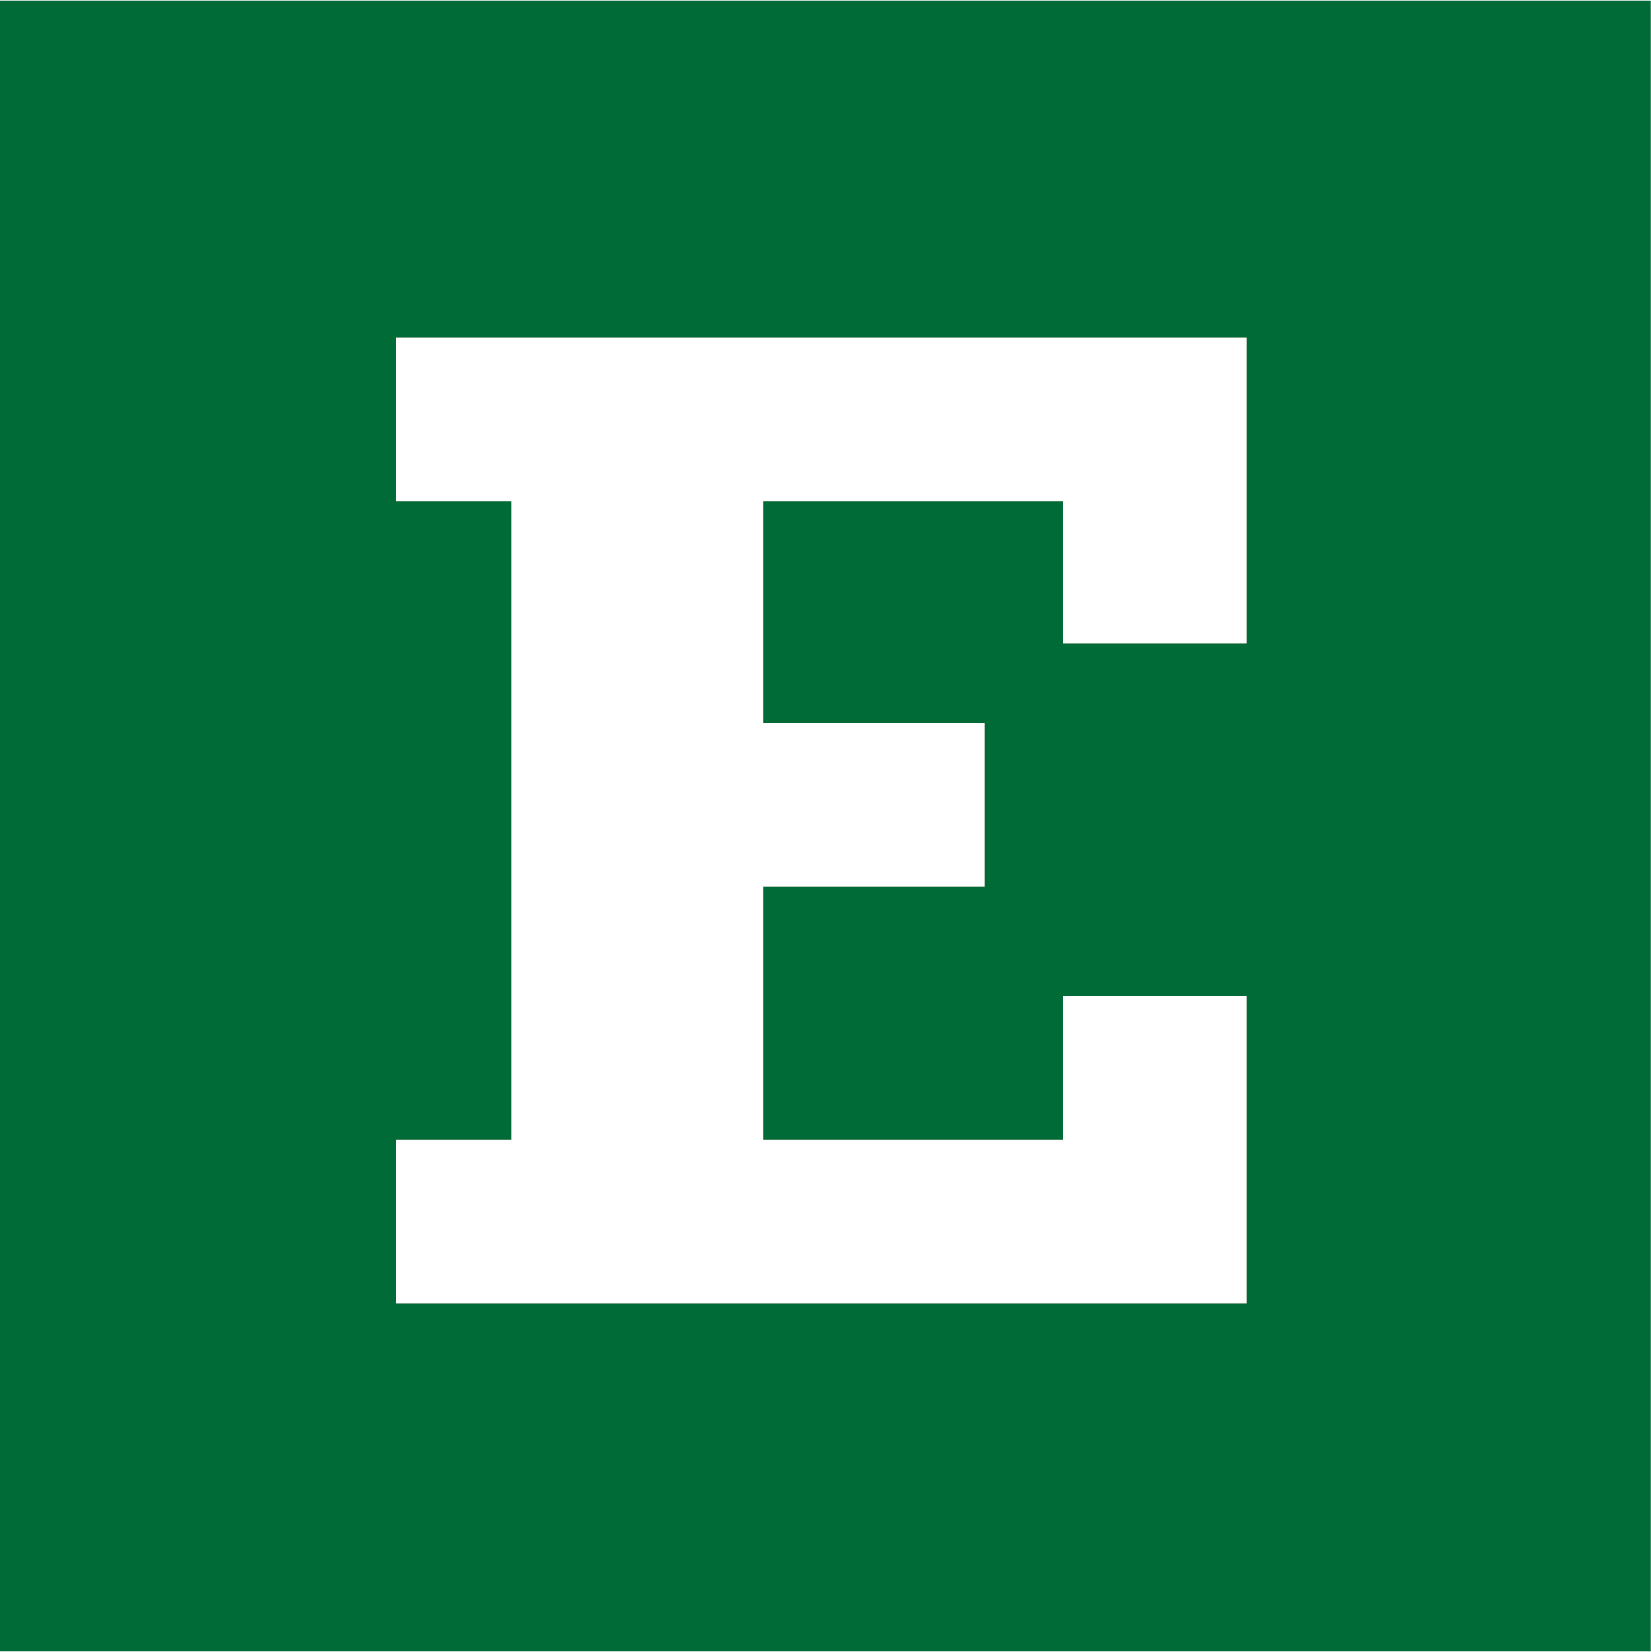 A square filled with green and a white letter E